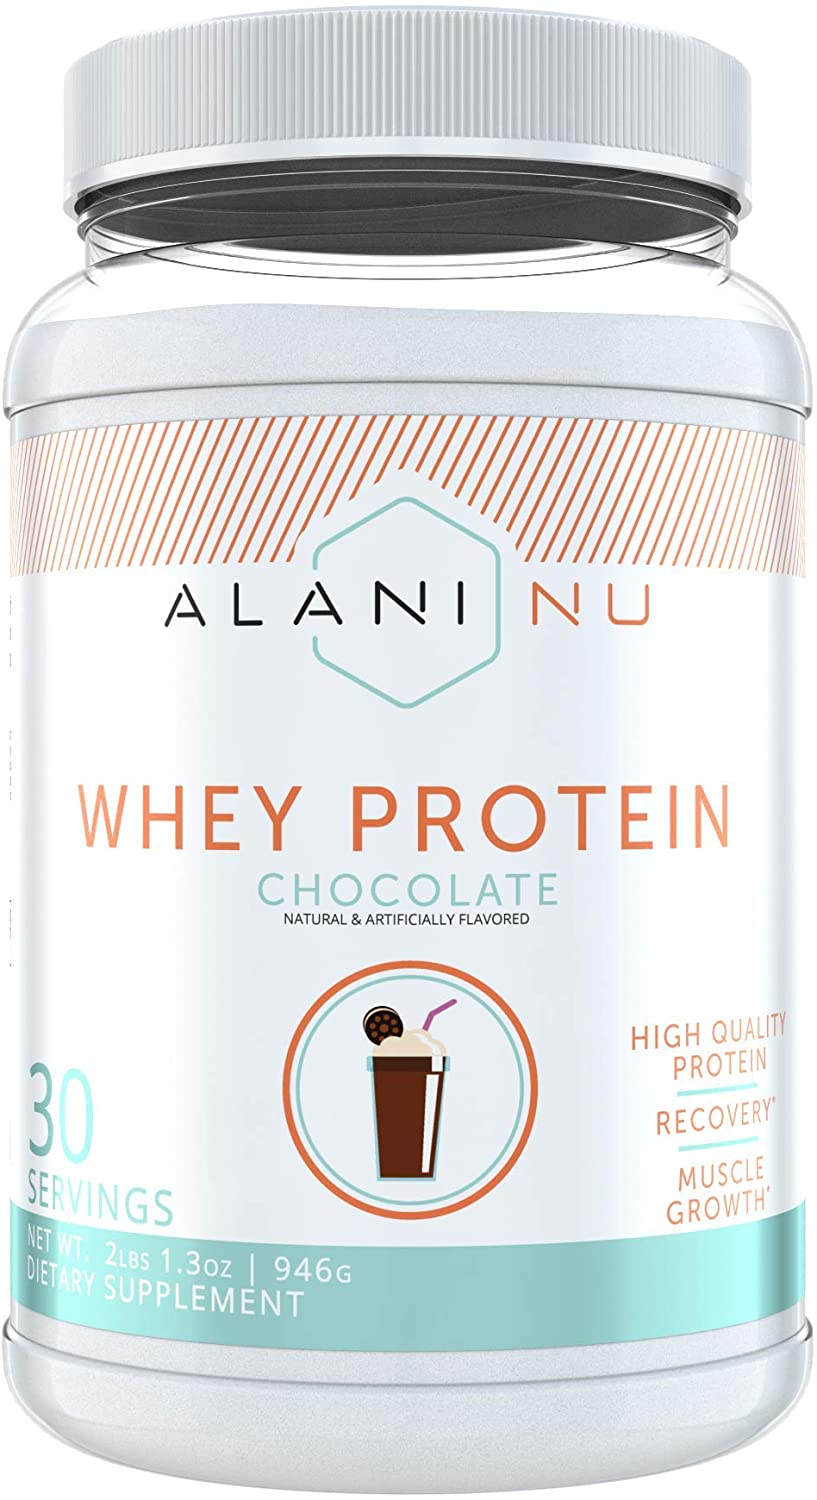 Alani Nu Whey Protein Chocolate / 30 Servings